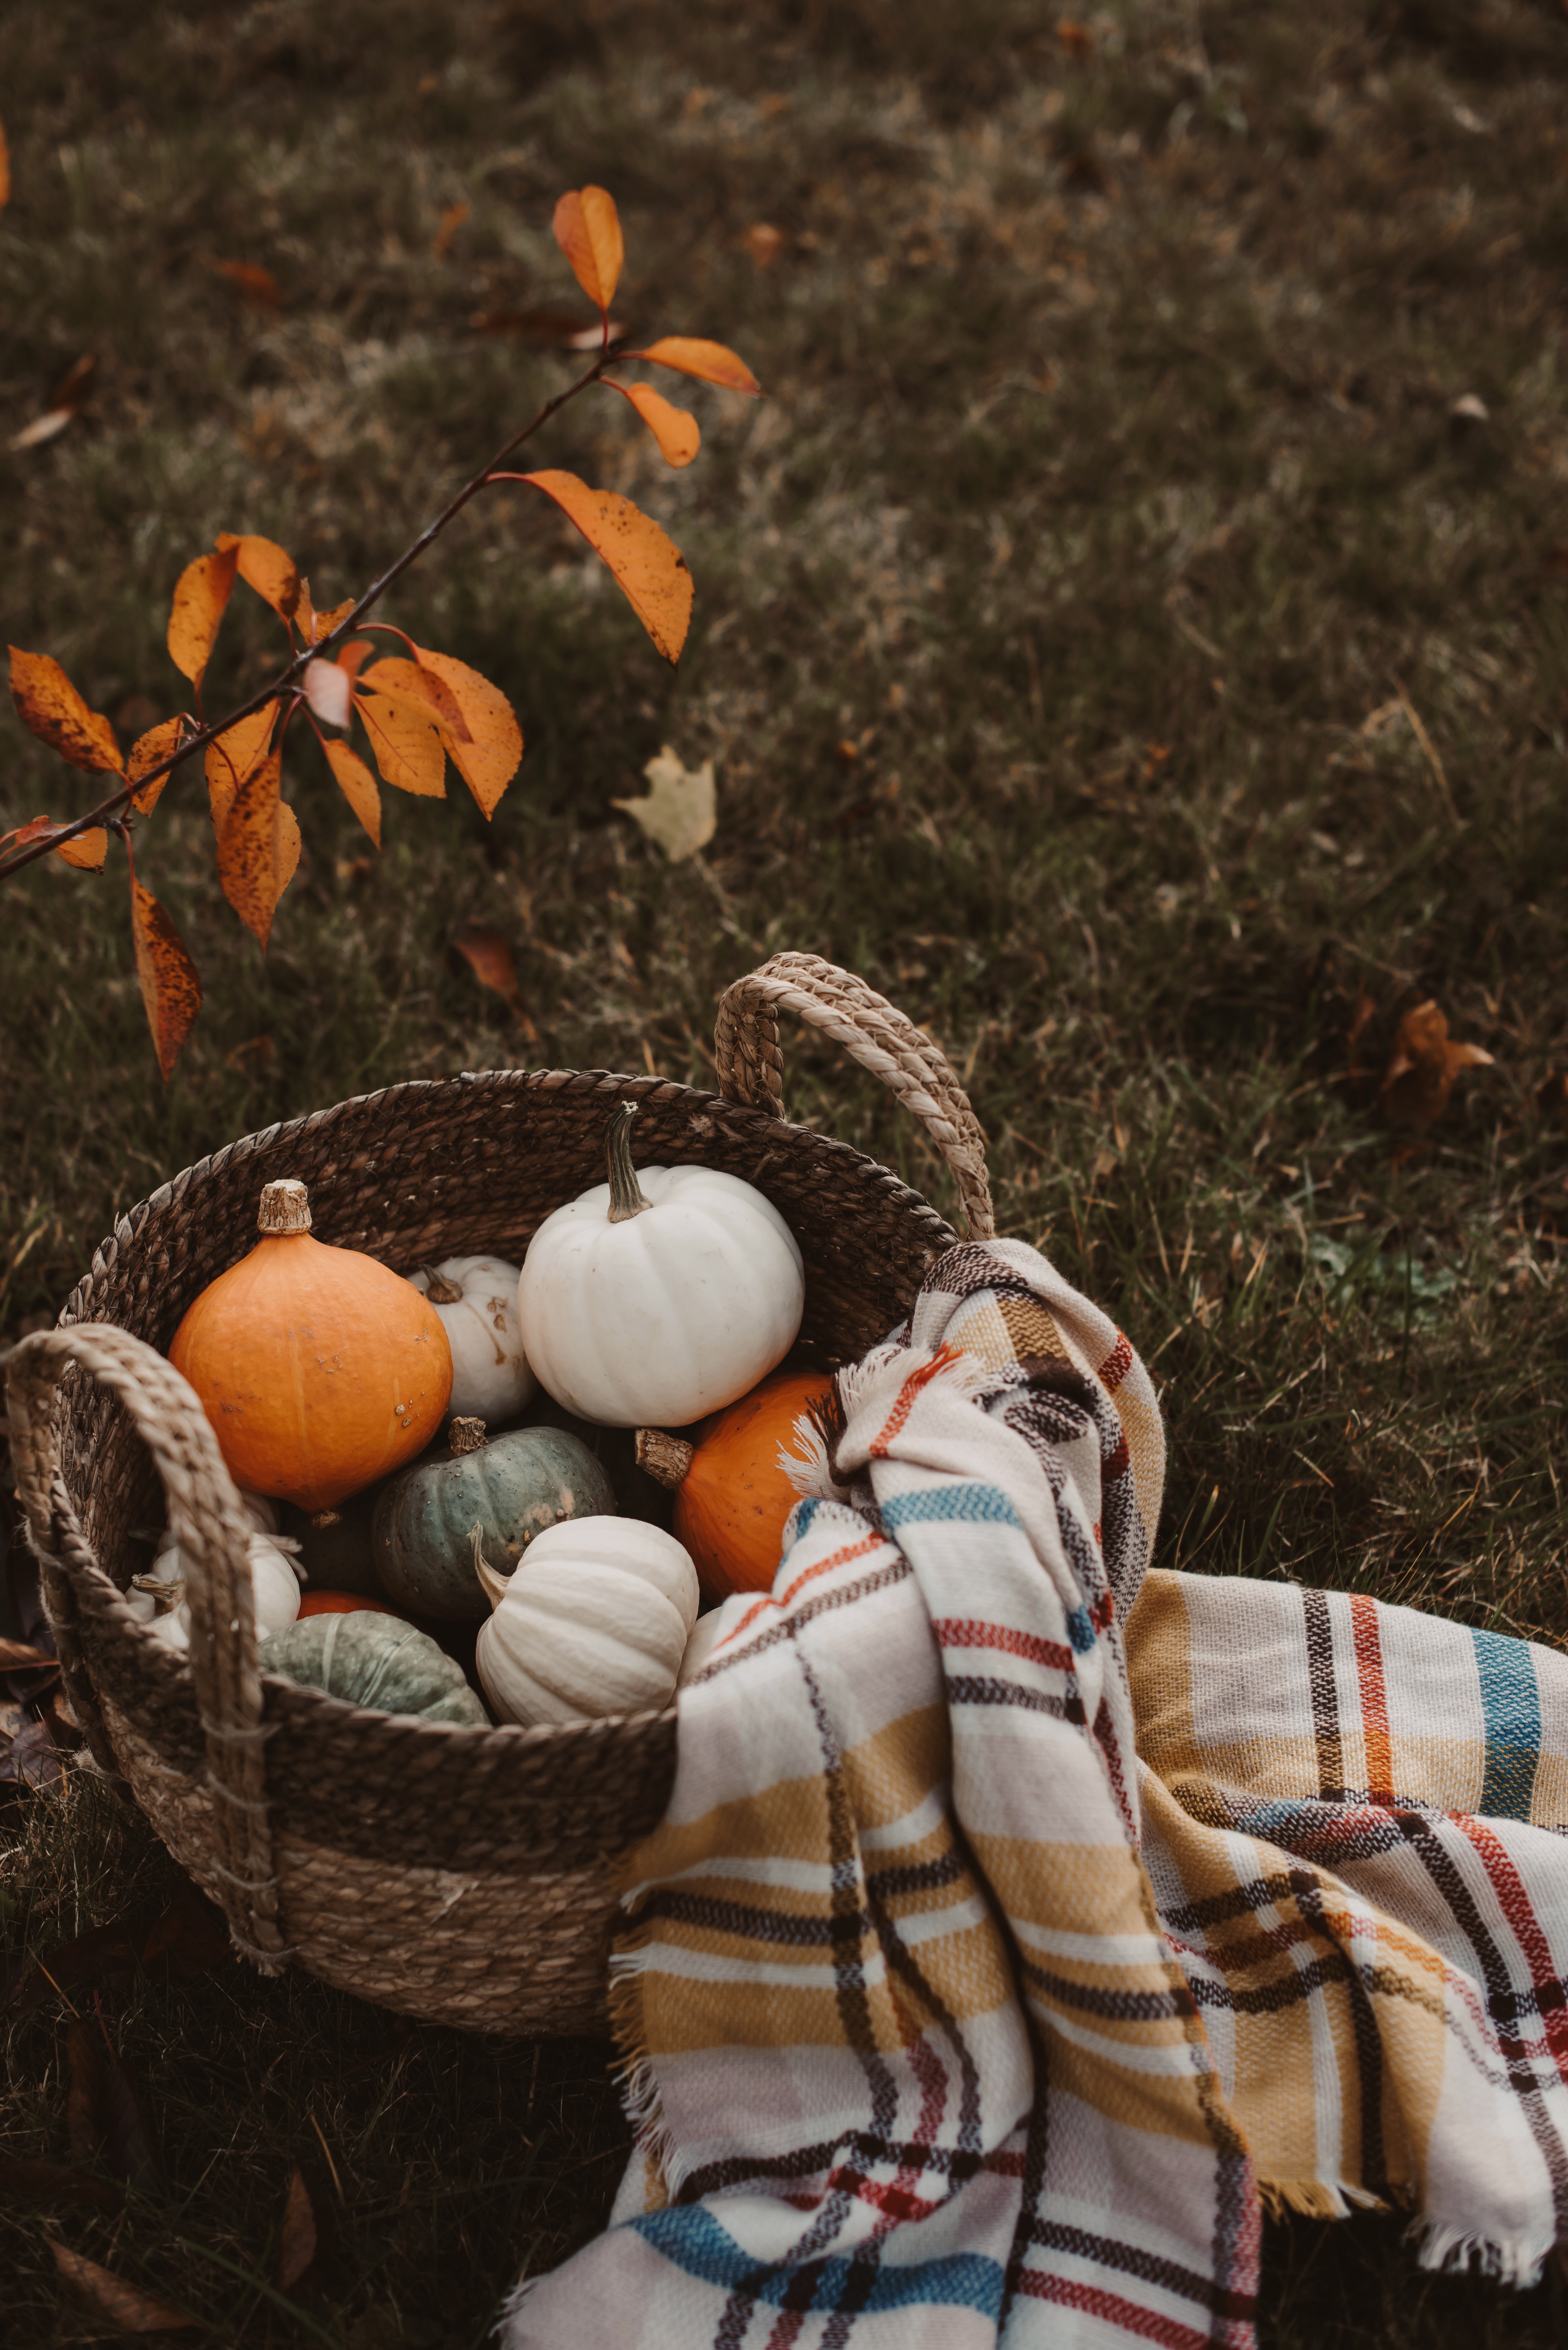 83266 download wallpaper pumpkin, food, autumn, basket, harvest, plaid screensavers and pictures for free